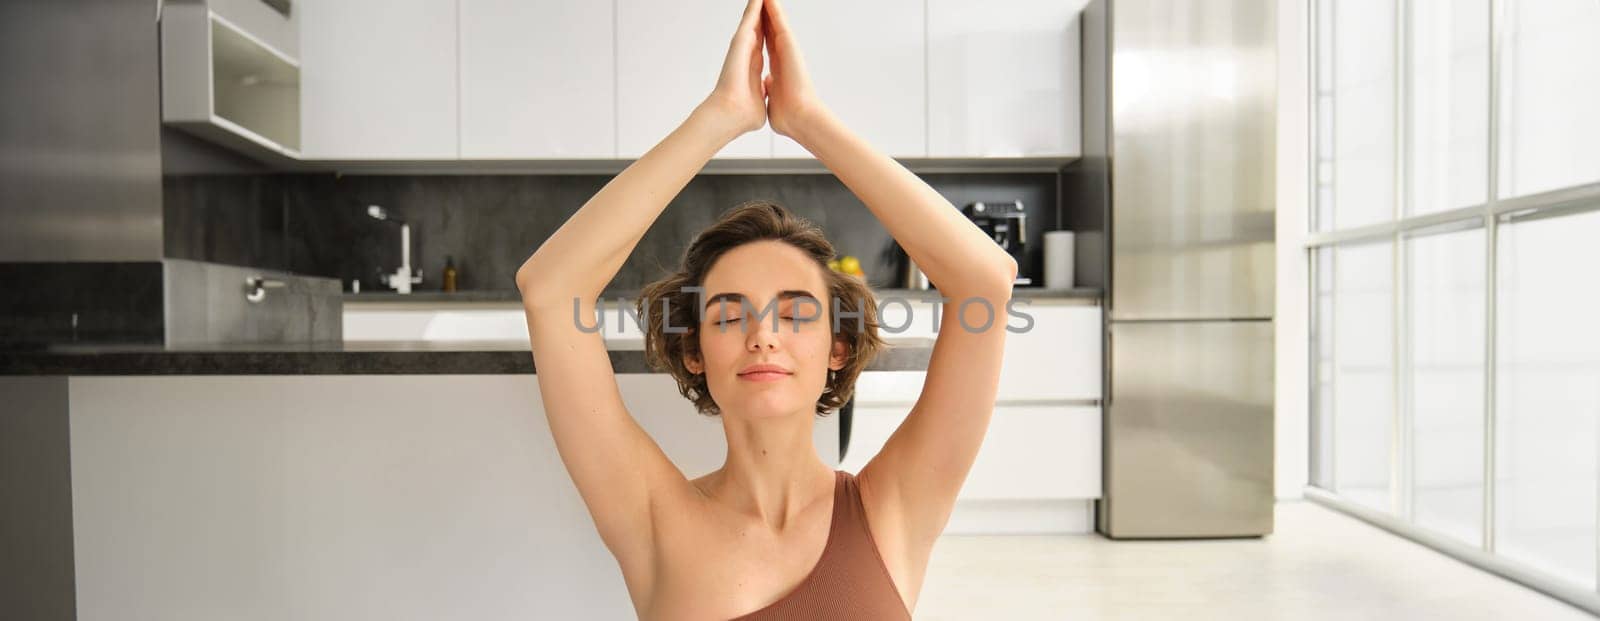 Image of young woman meditating, raising her hands up above head, practice mindfulness at home, doing yoga session on rubber mat in bright room, wearing sportswear.